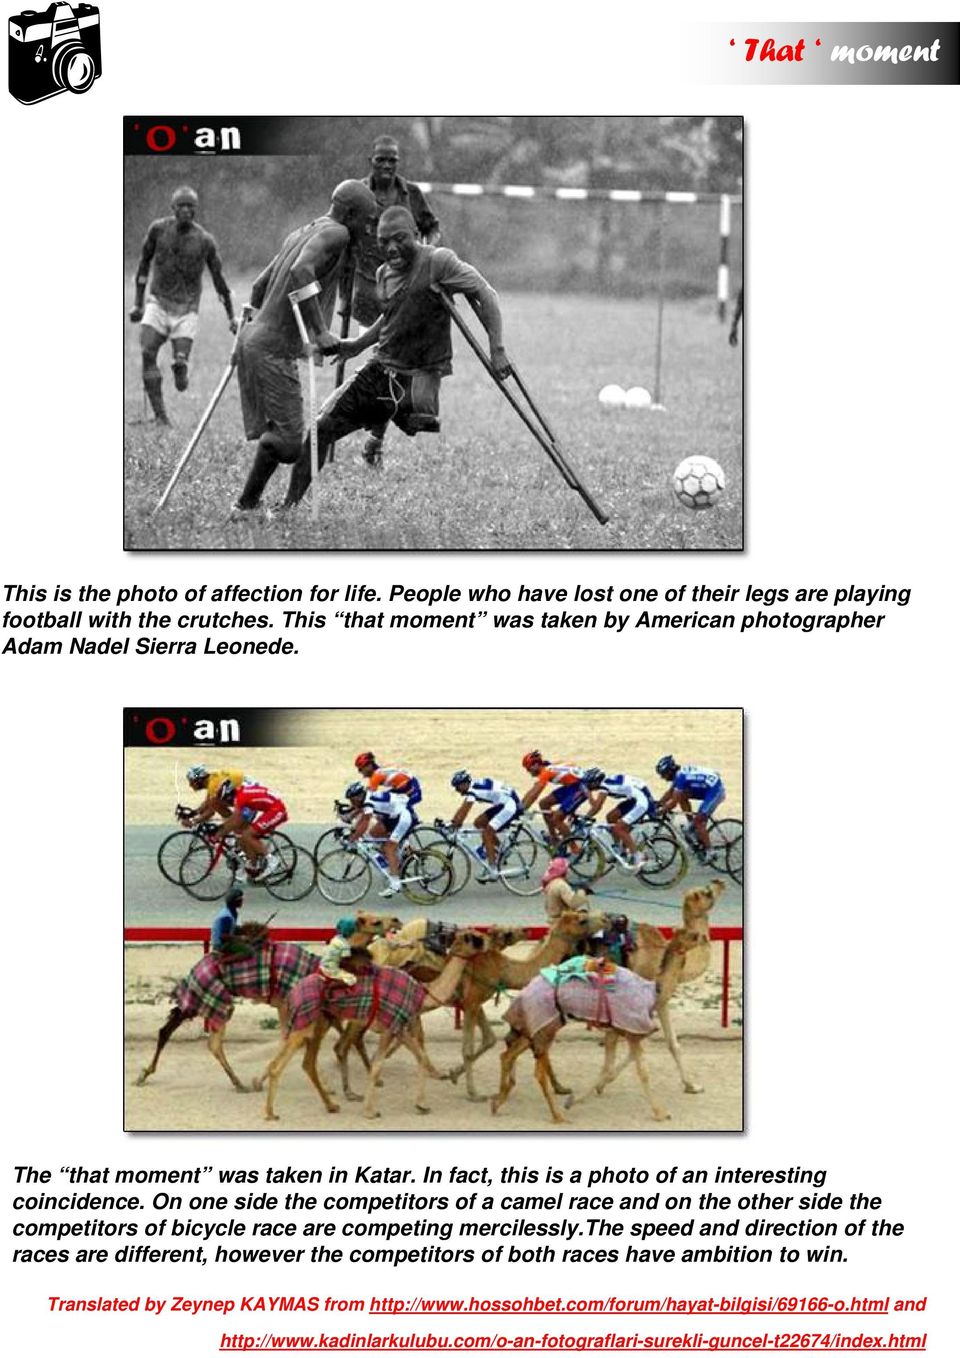 On one side the competitors of a camel race and on the other side the competitors of bicycle race are competing mercilessly.